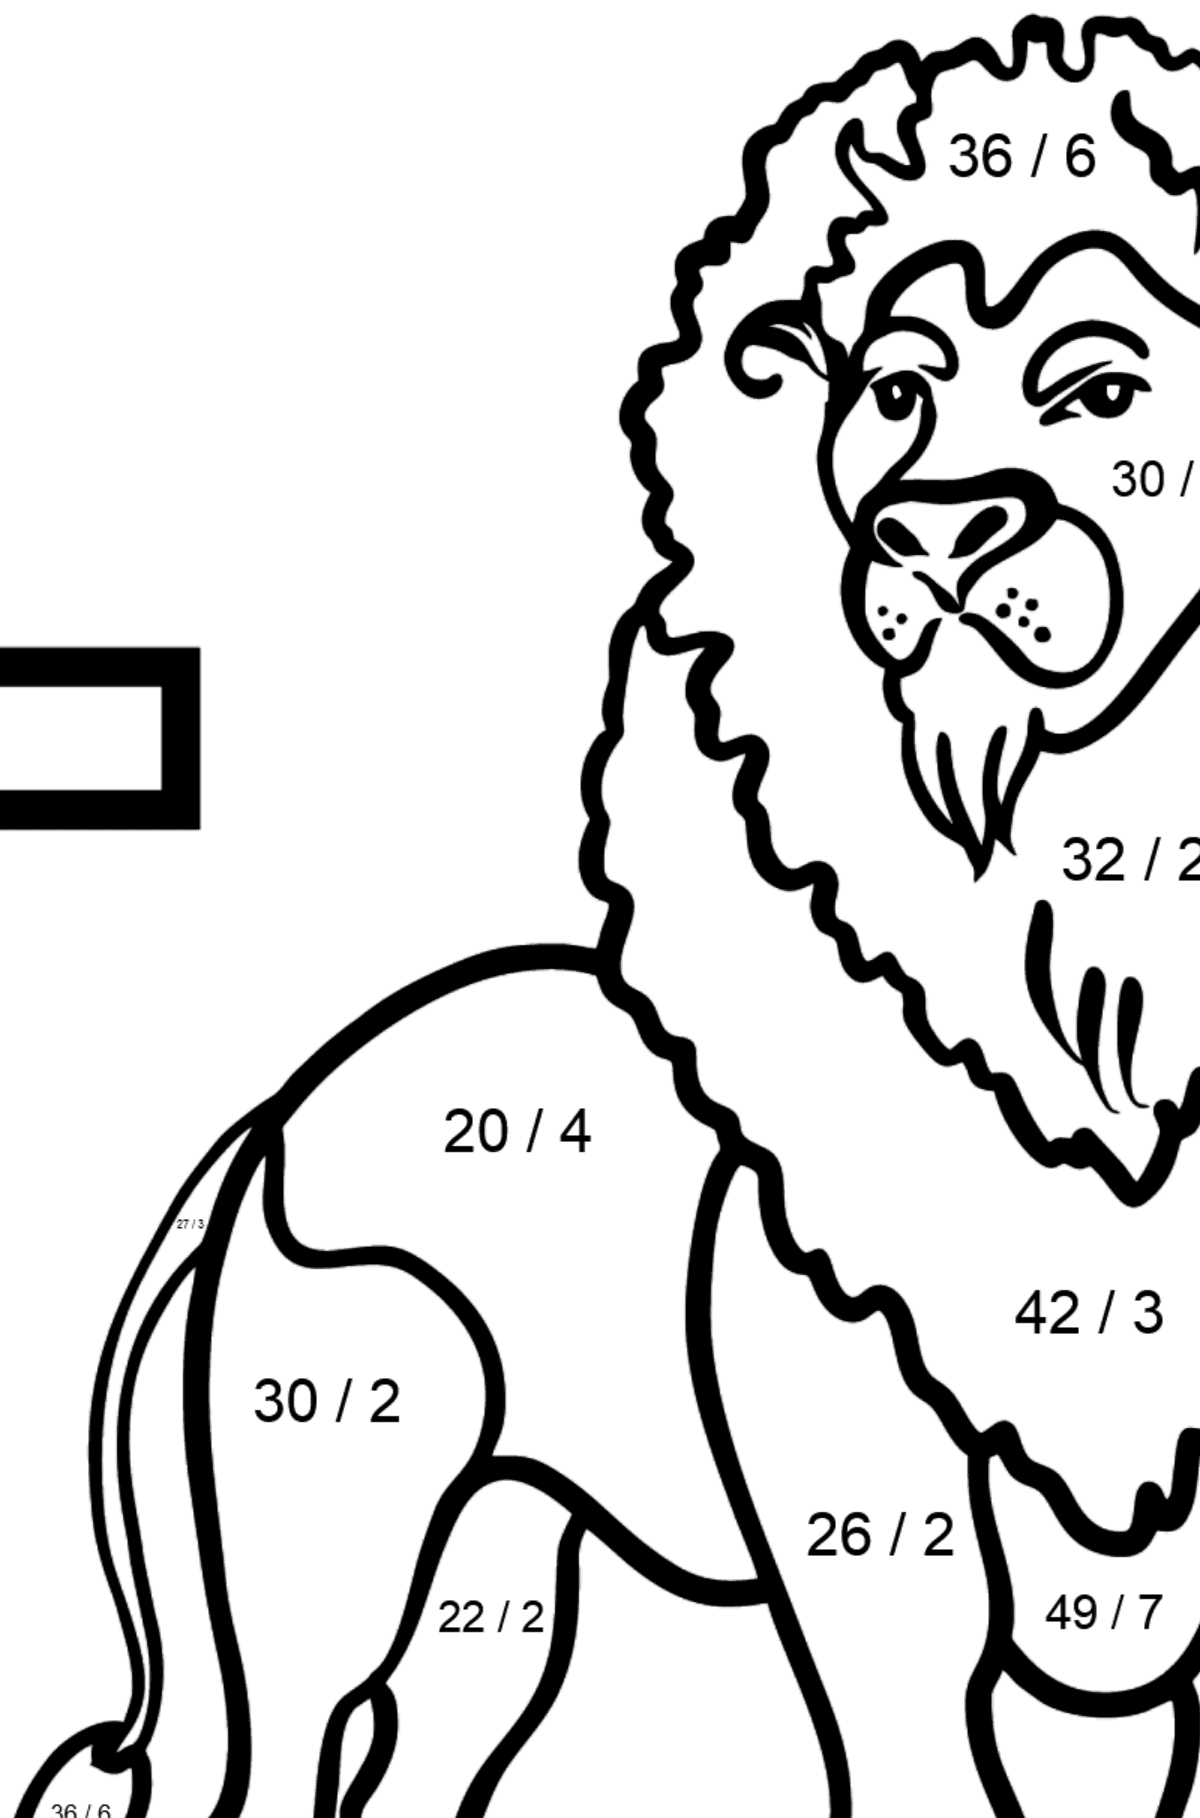 Spanish Letter L coloring pages - LEON - Math Coloring - Division for Kids